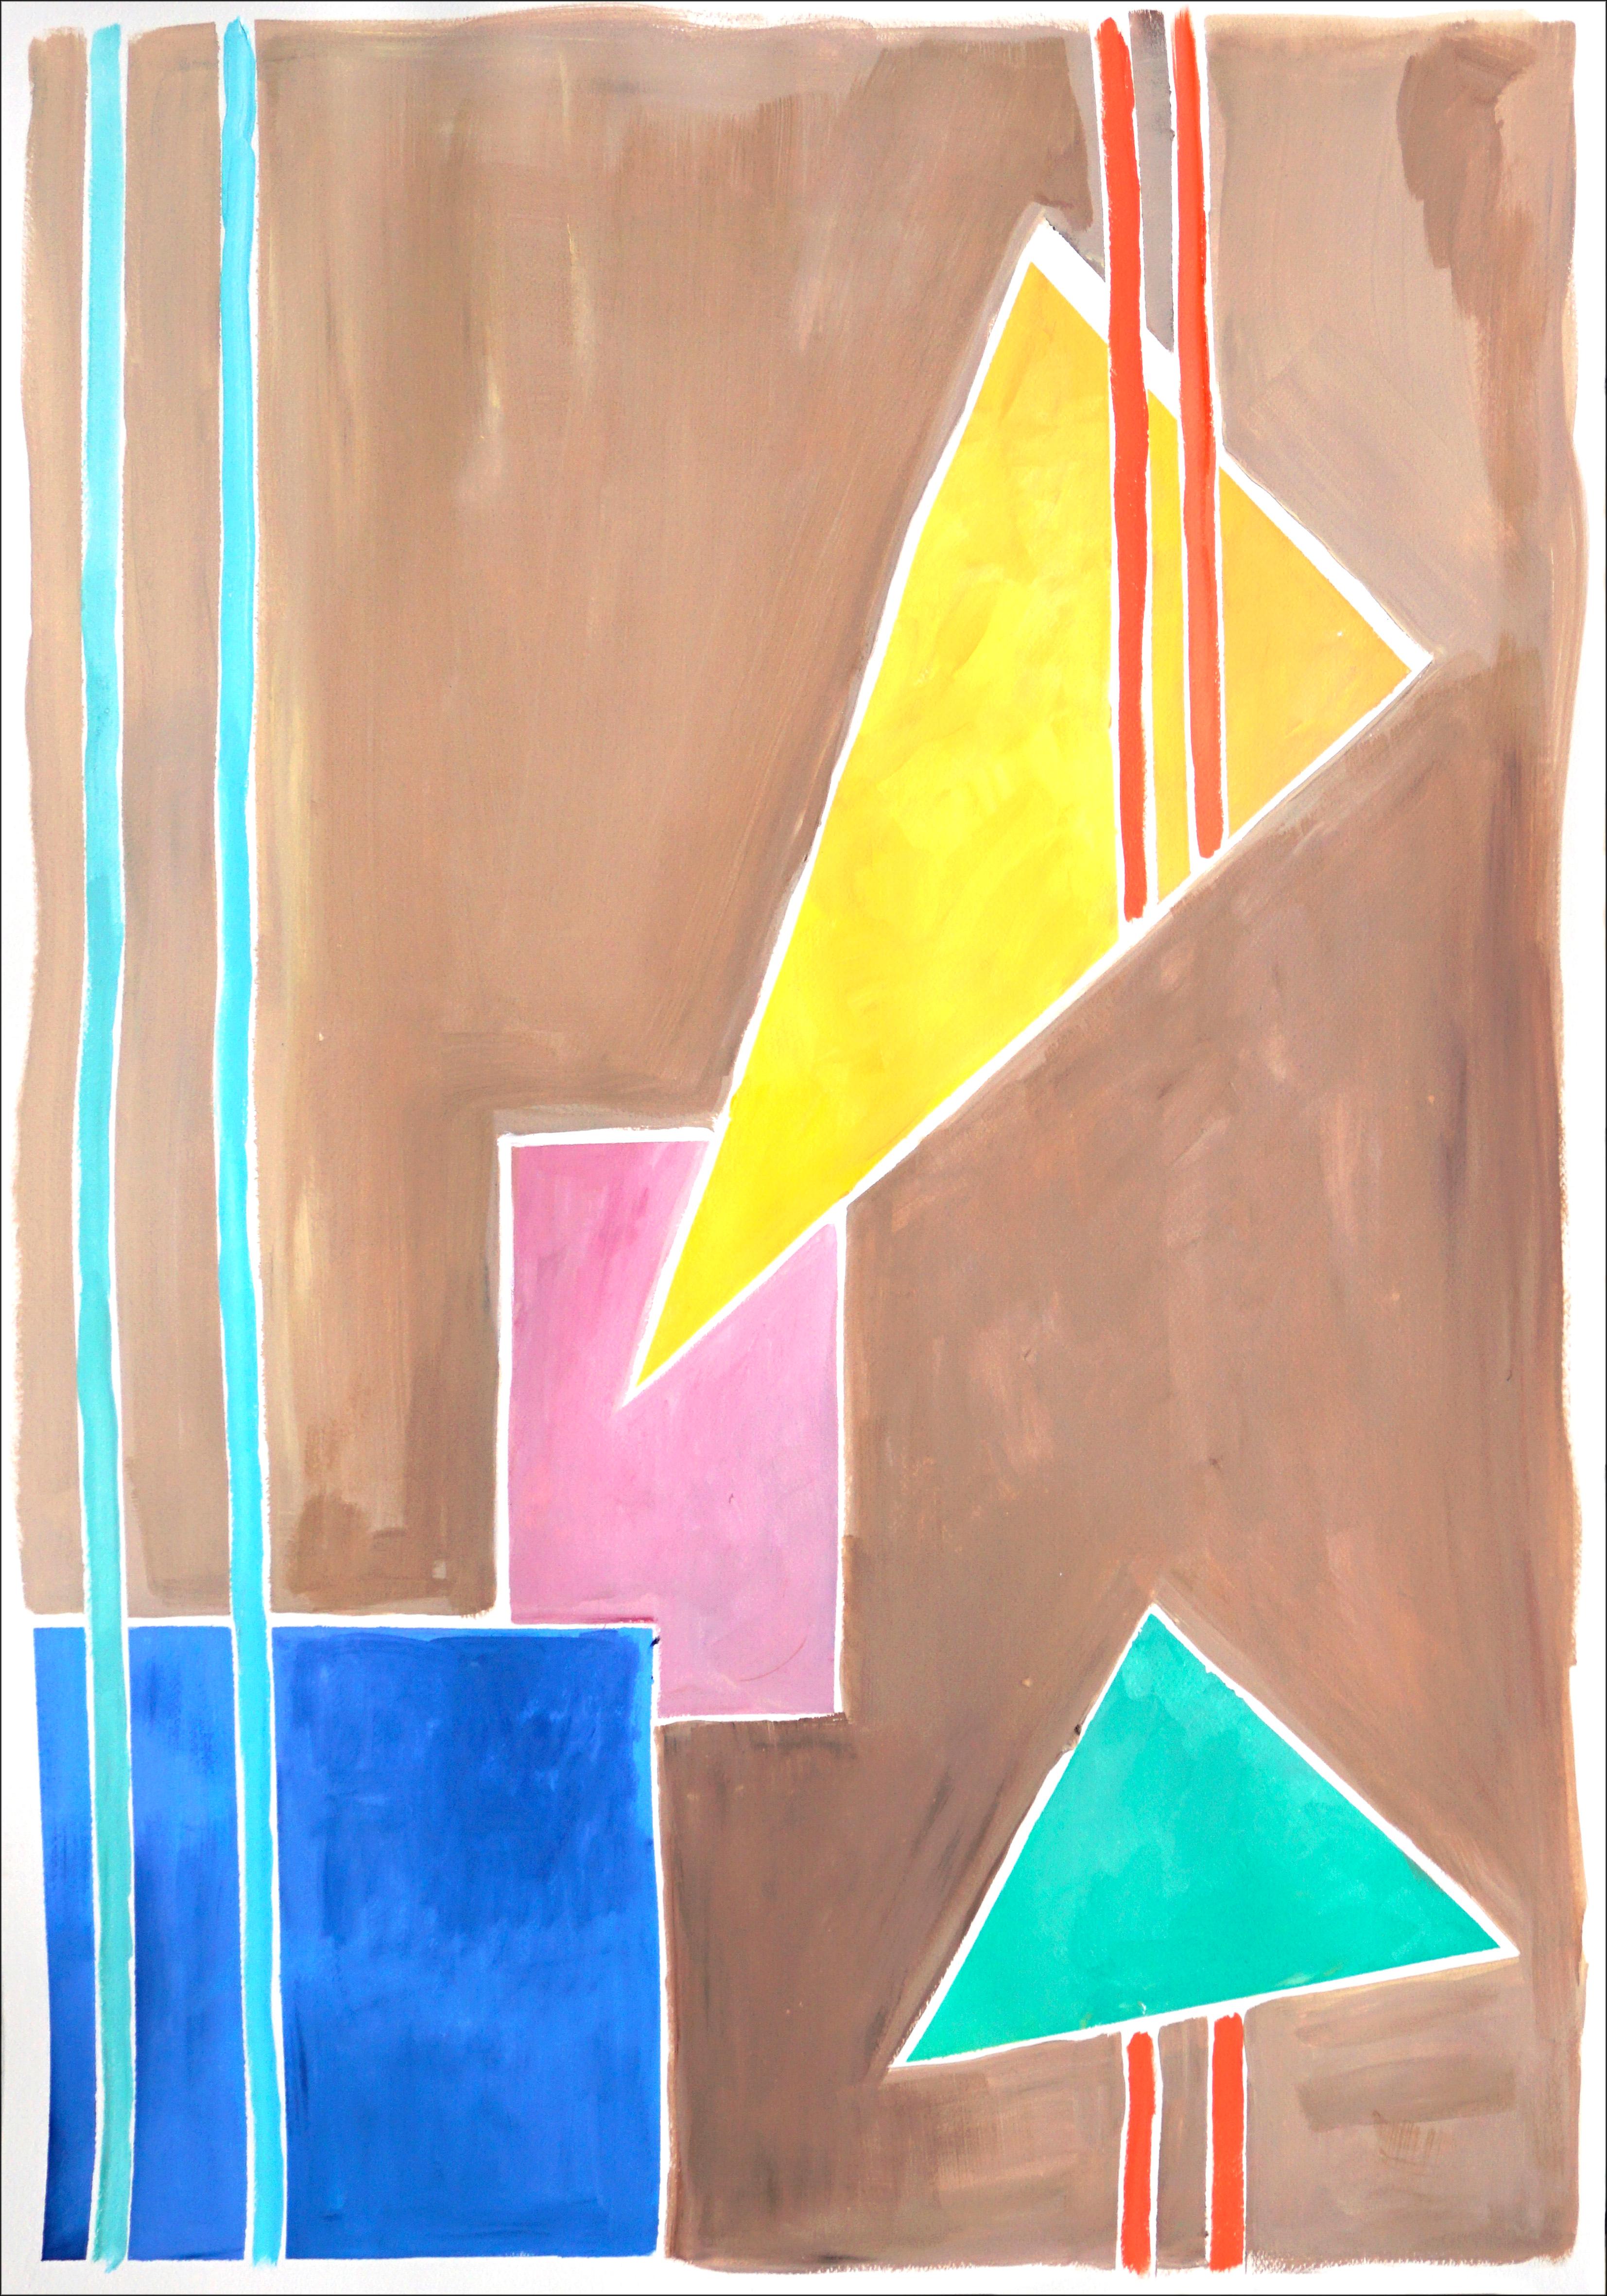 Balanced Geometry I, Primary Pastel Tones, Shapes and Lines on Tan Background